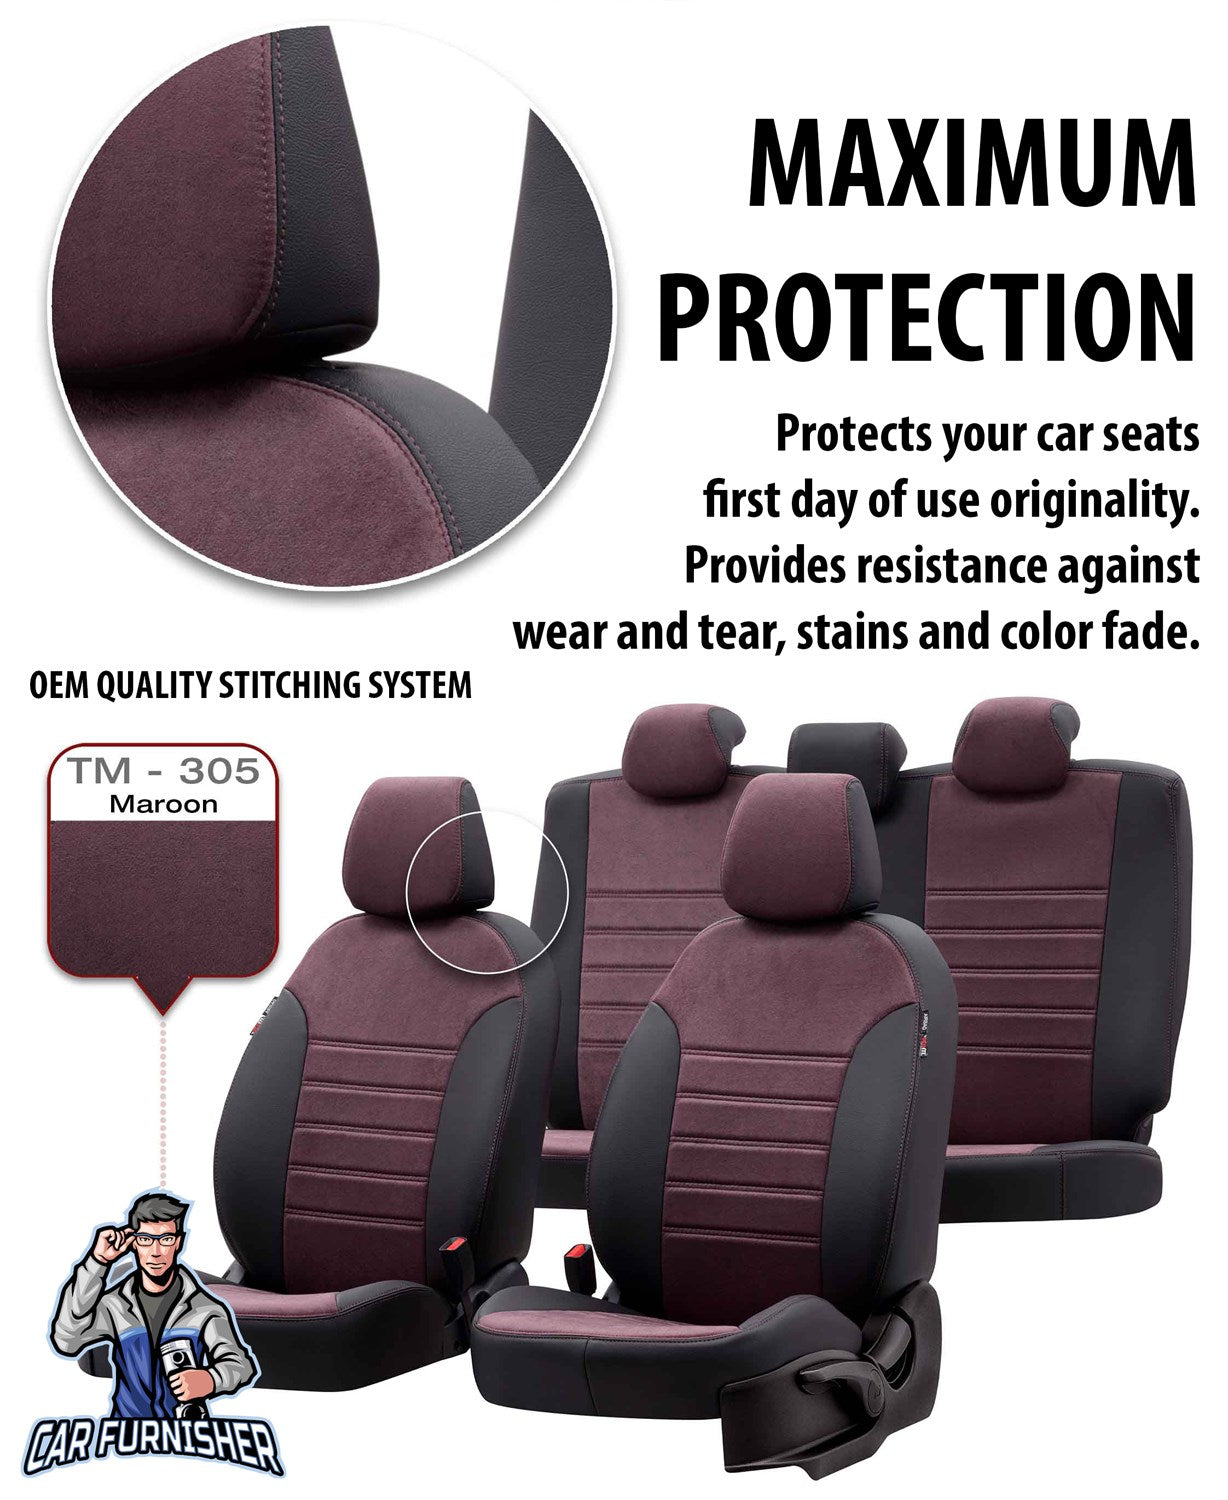 Jeep Grand Cherokee Seat Cover Milano Suede Design Burgundy Leather & Suede Fabric